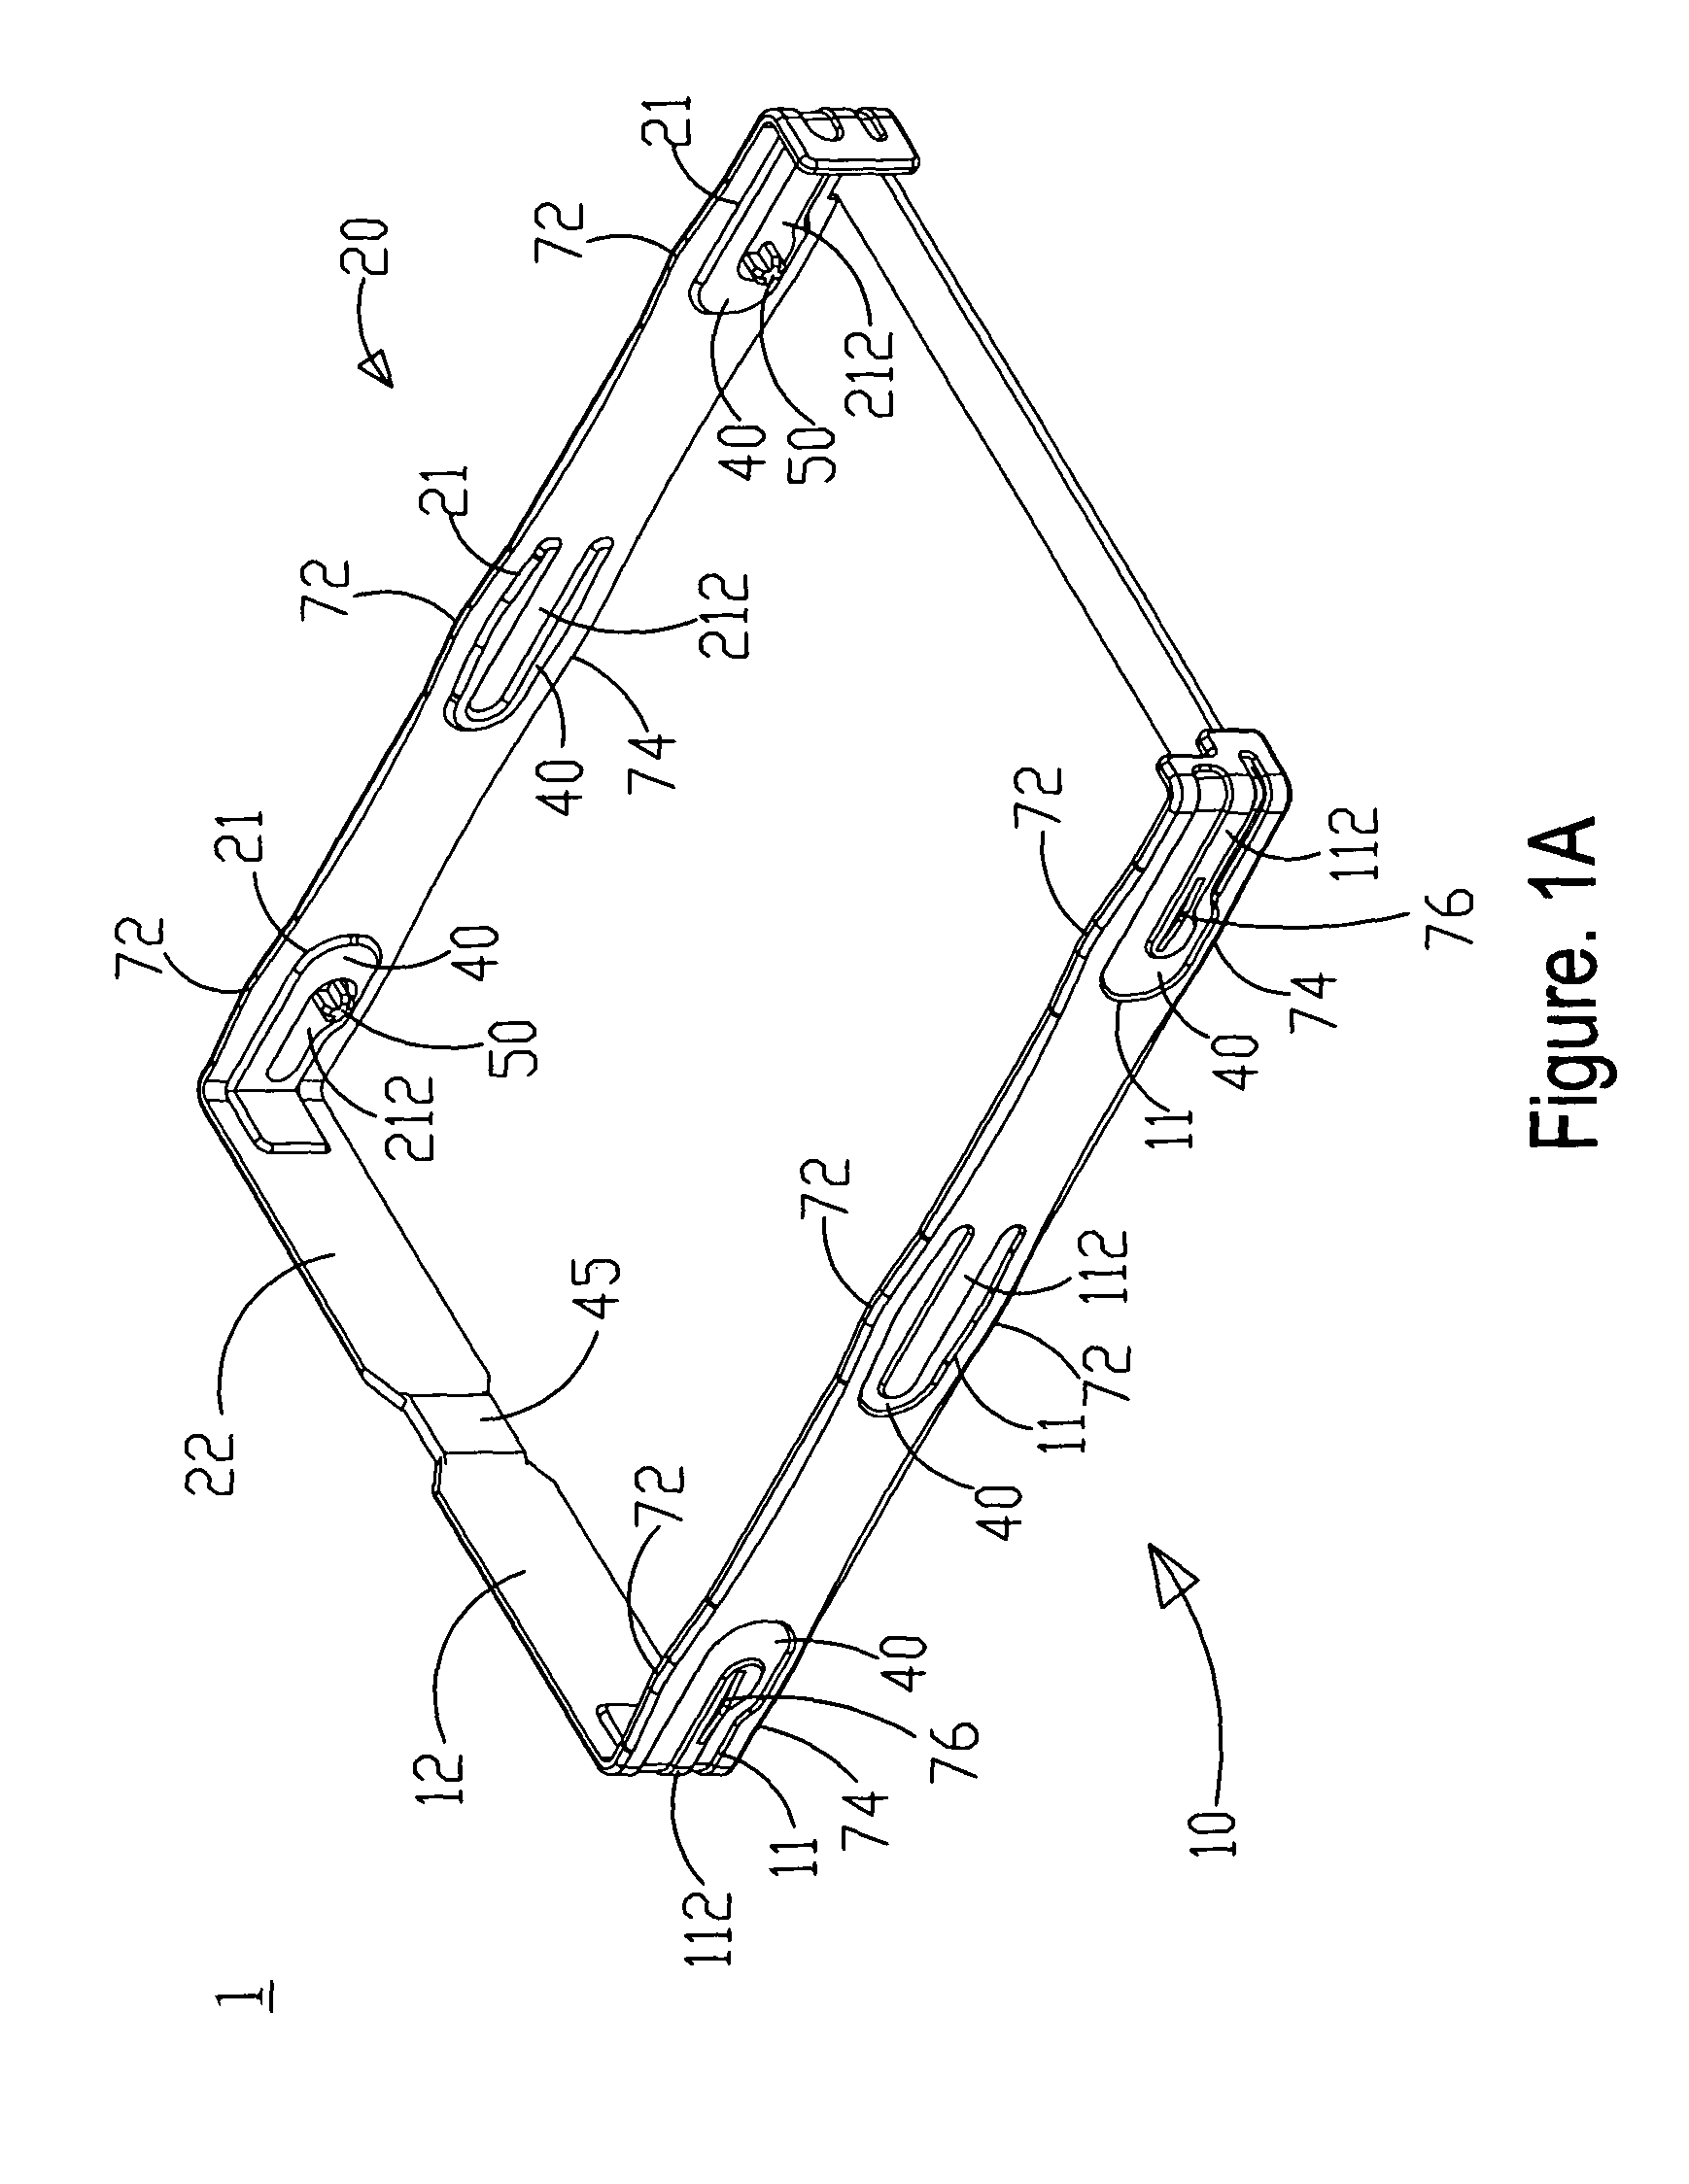 Shock-absorbing structure for storage apparatus